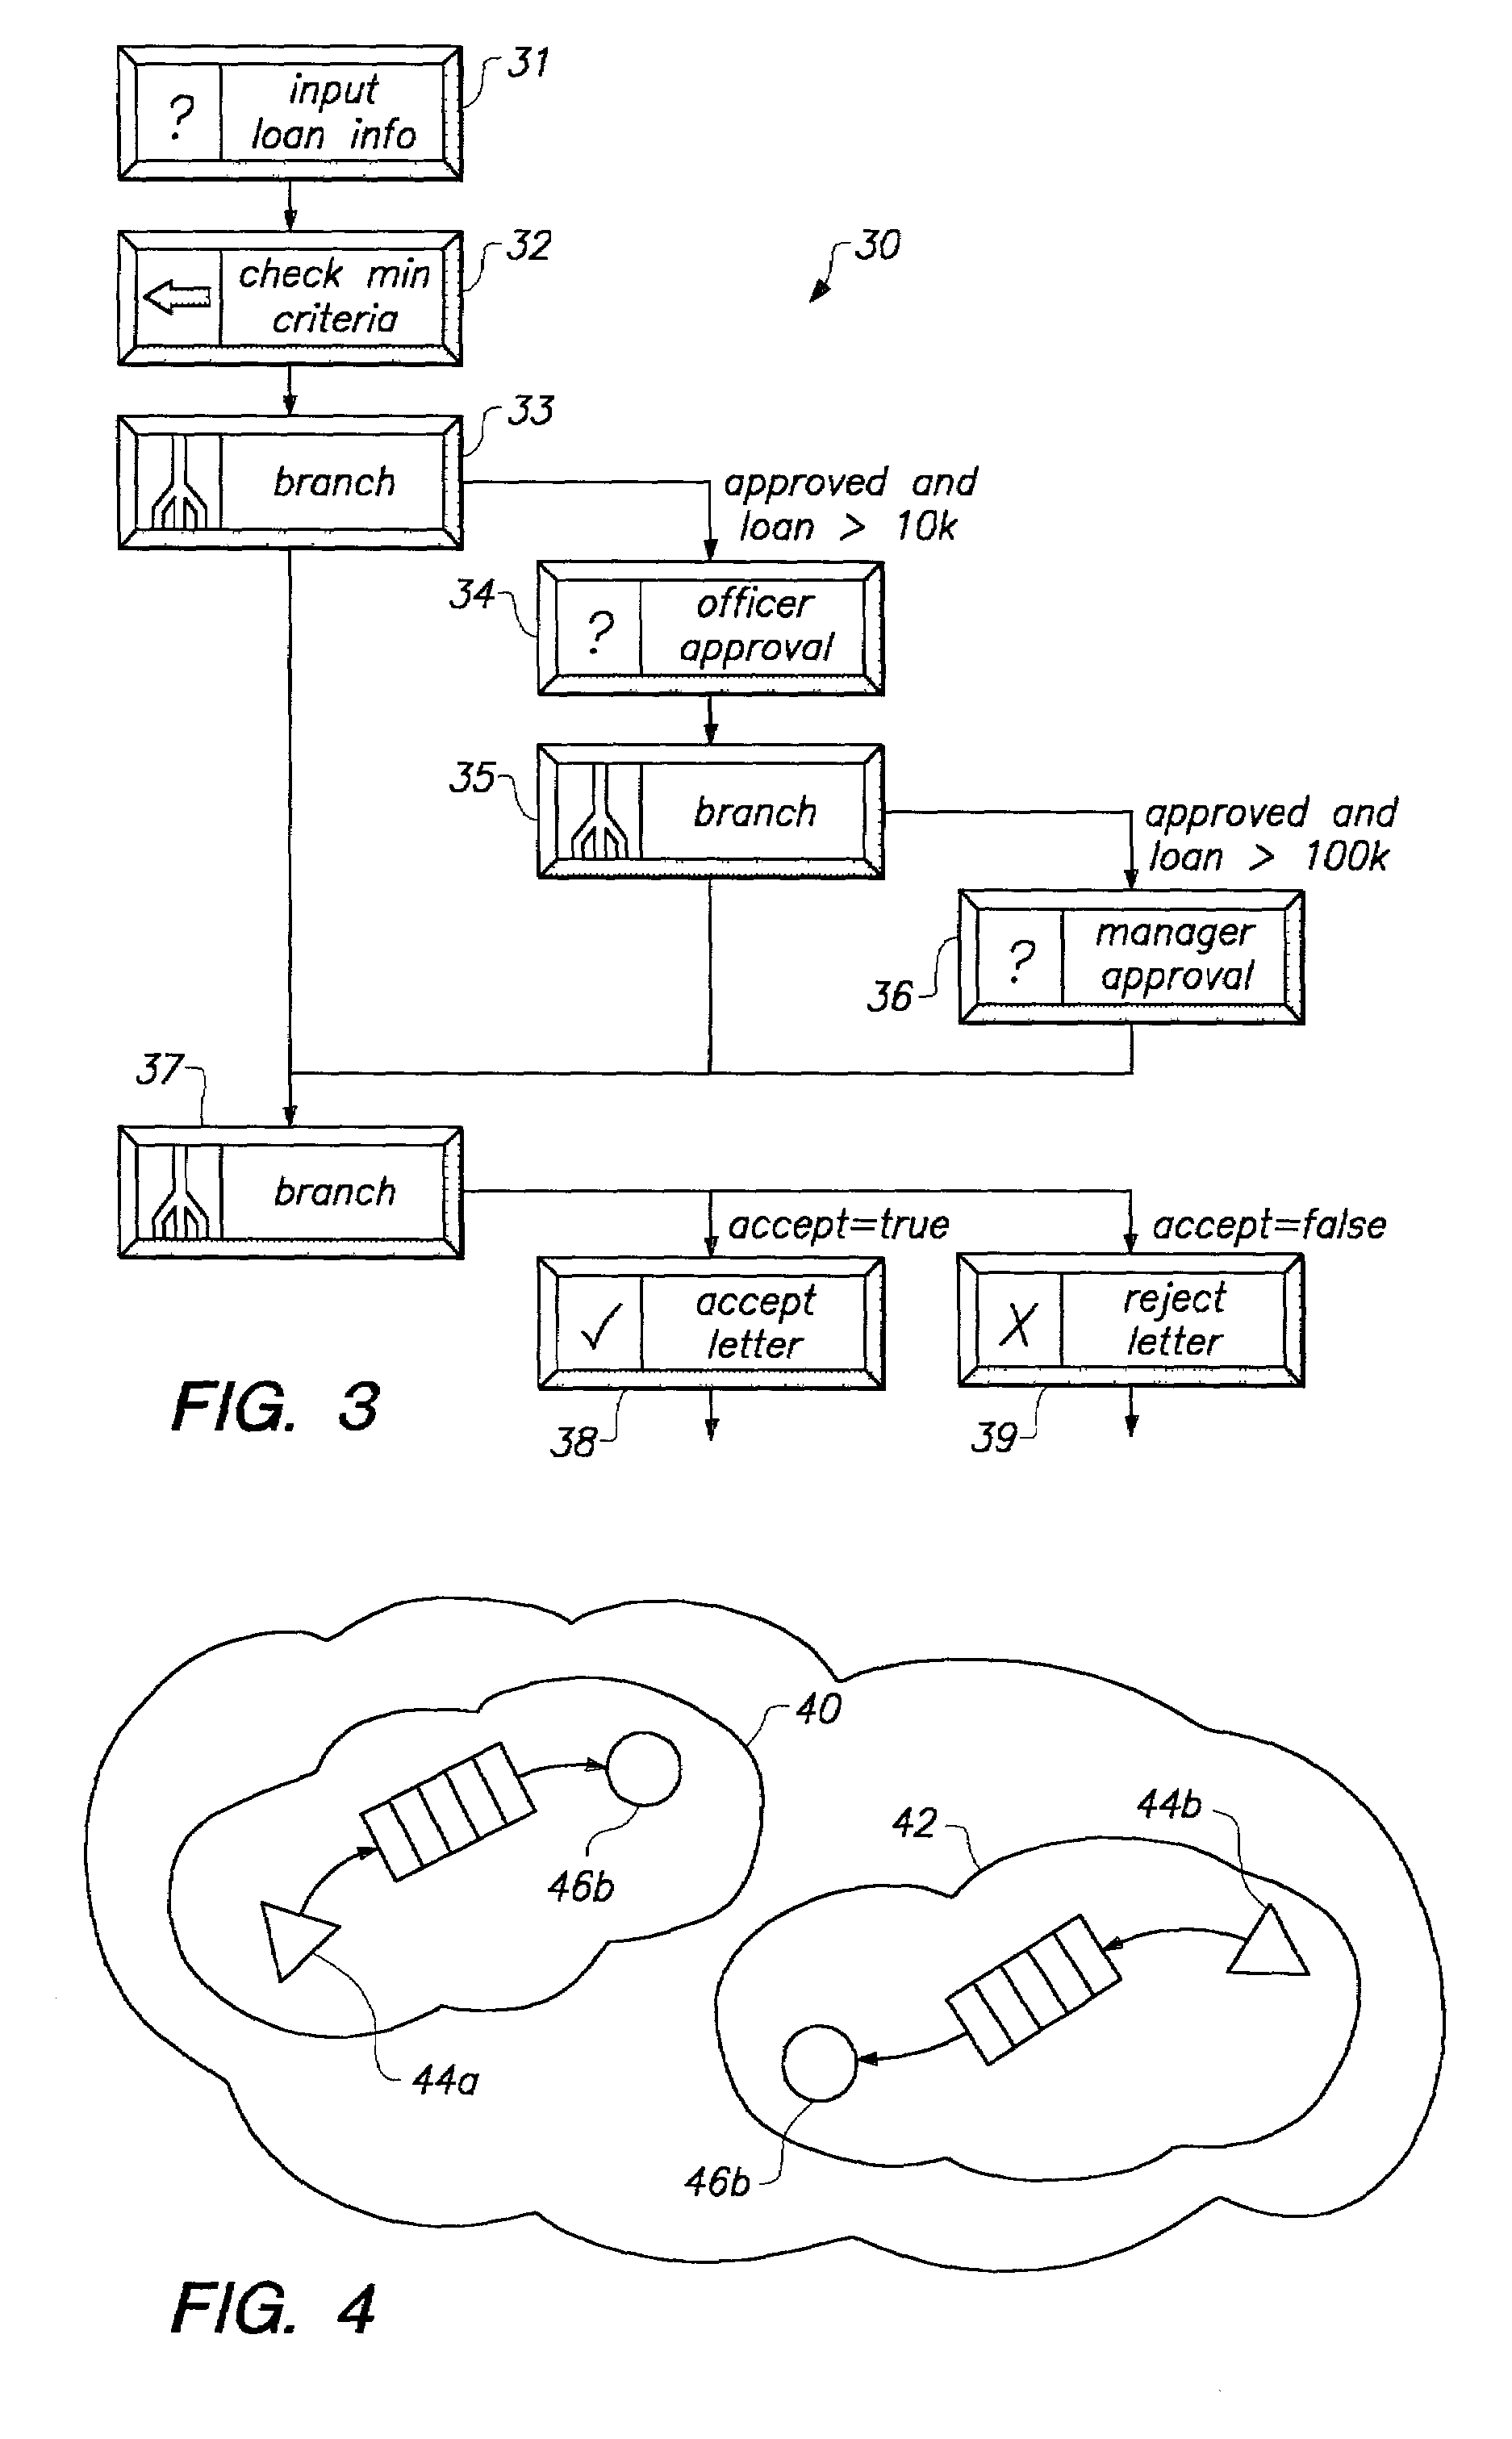 Multilevel queuing system for distributing tasks in an enterprise-wide work flow automation